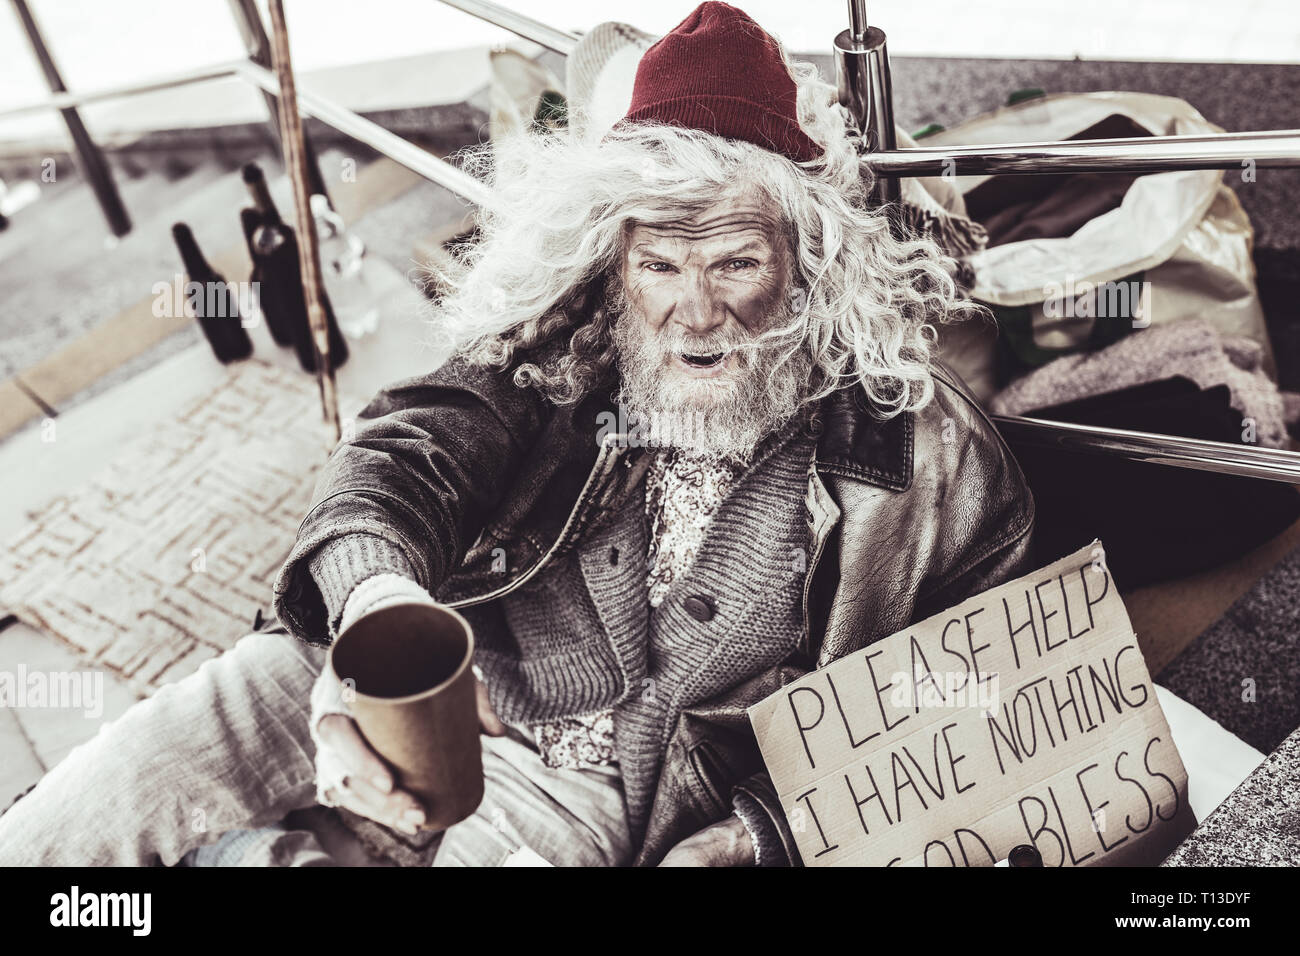 Homeless old man trying to move to pity pedestrians. Stock Photo